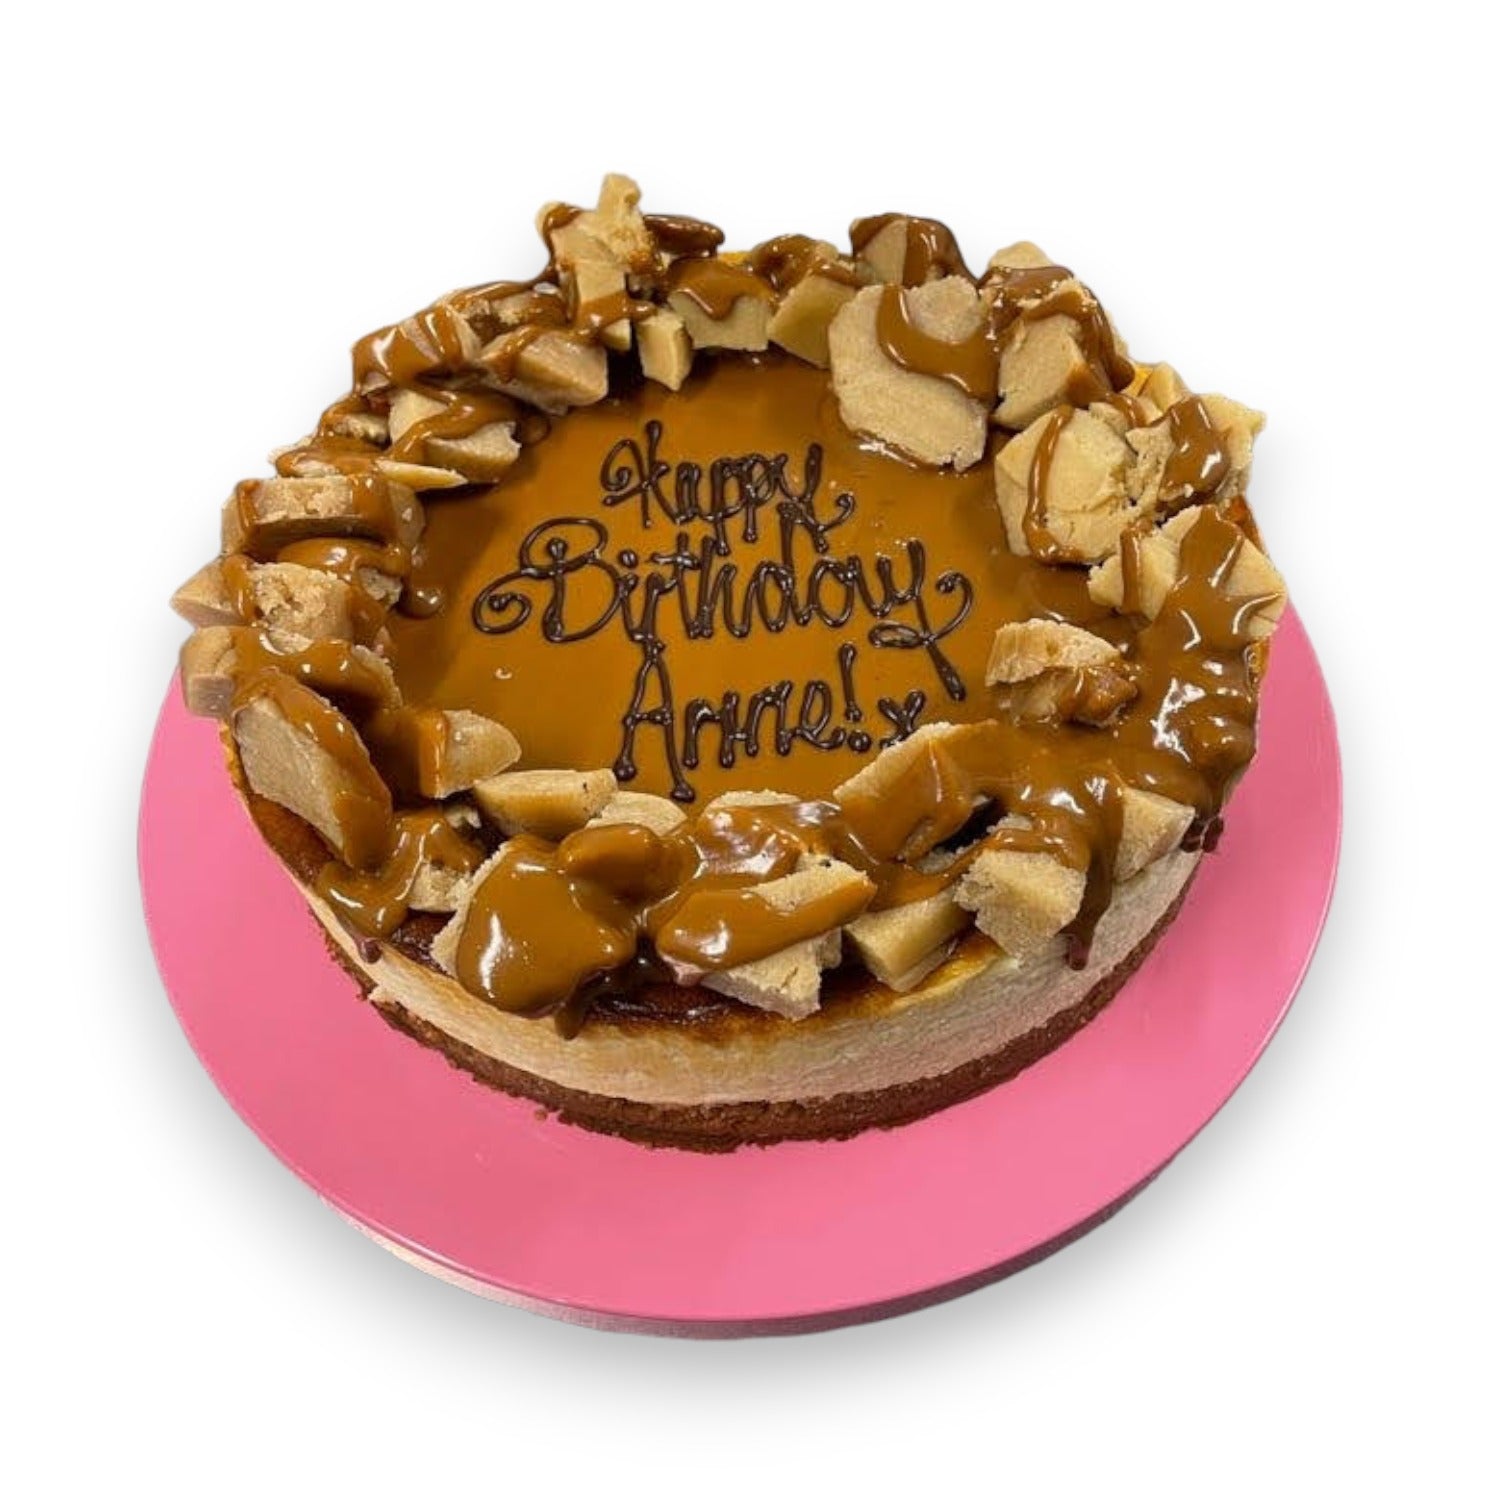 Vegan Birthday Cake Delivery by Lola's | Buy Online & Enjoy Fast Delivery  in London | Dairy Free Cakes To Buy